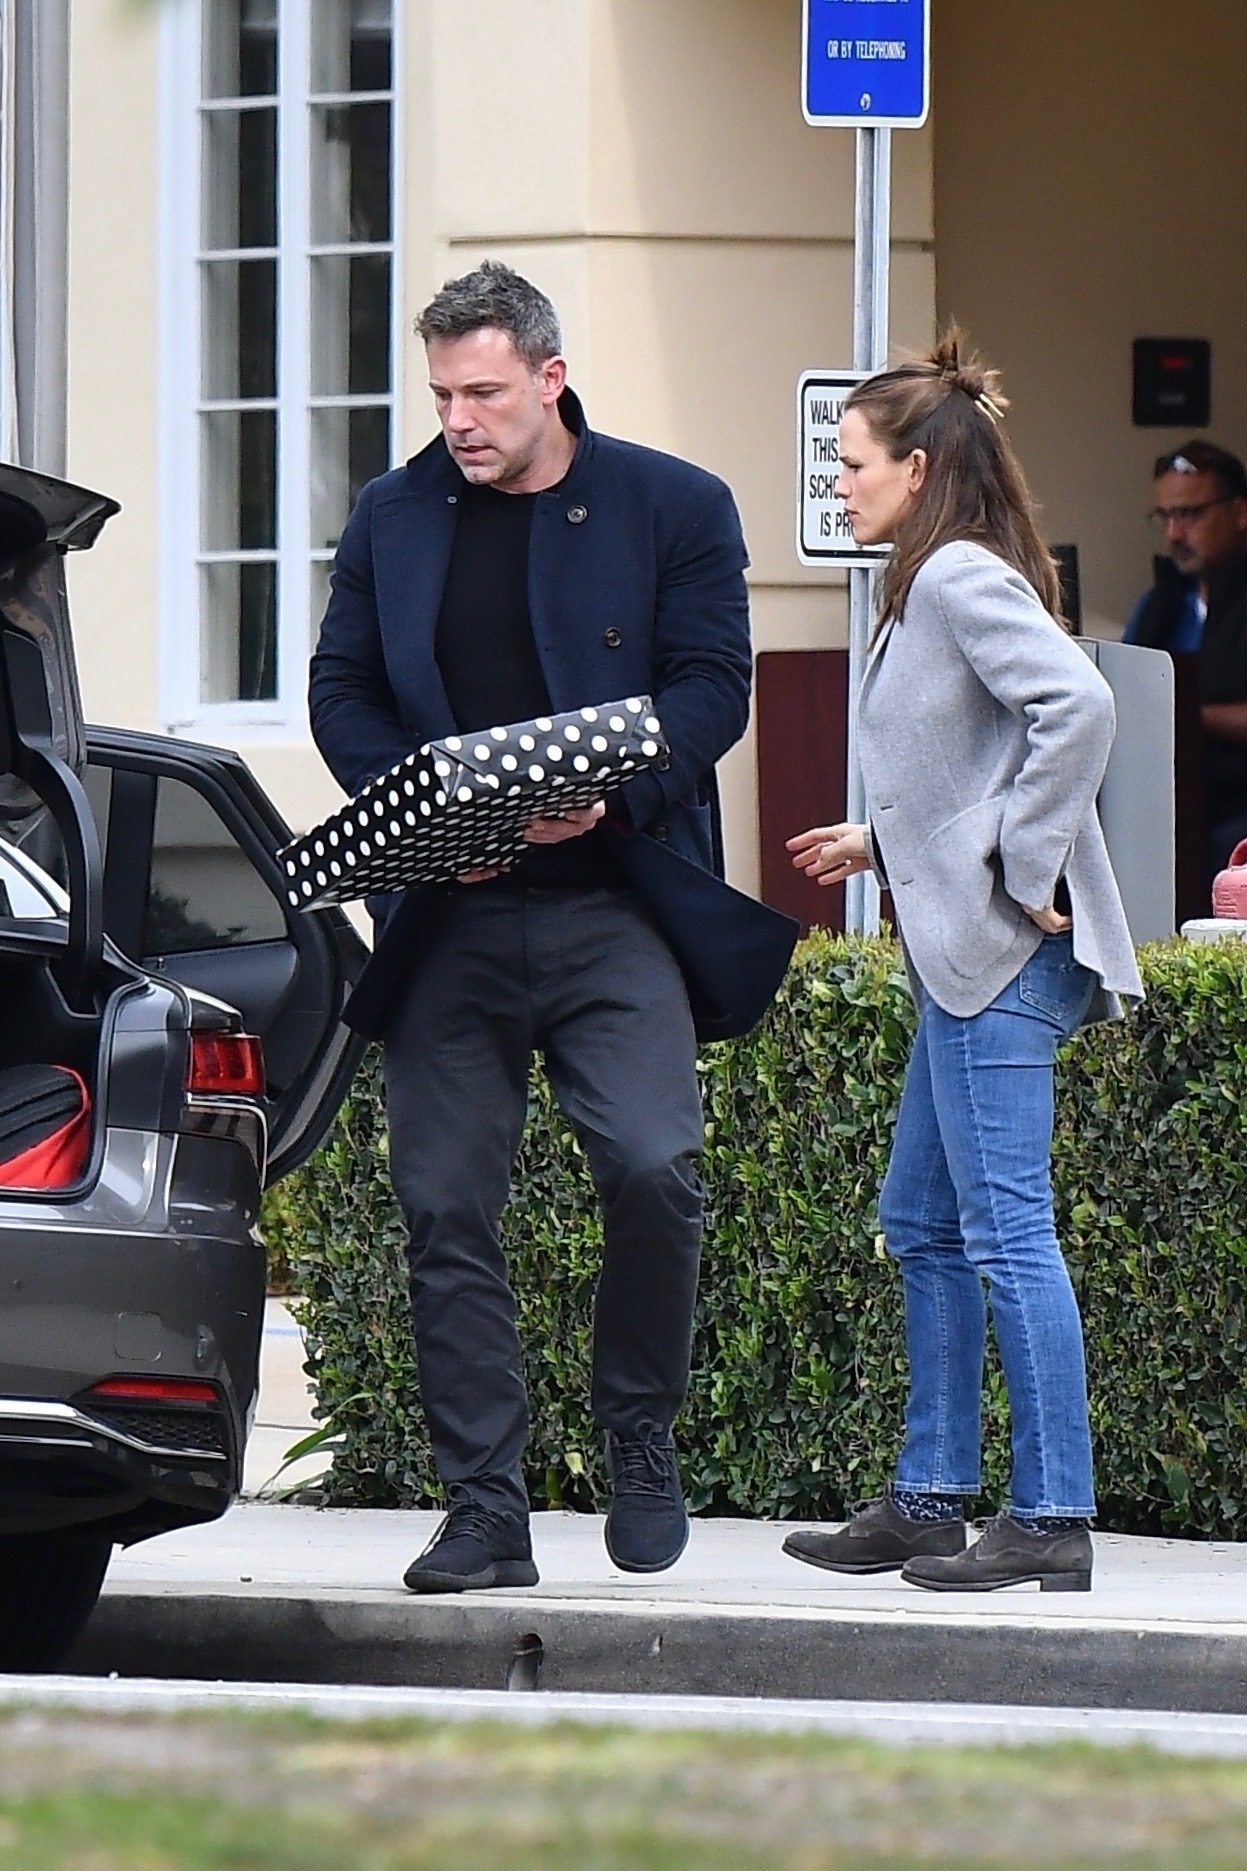 Jennifer Garner and Ben Affleck team up to take their son to a party